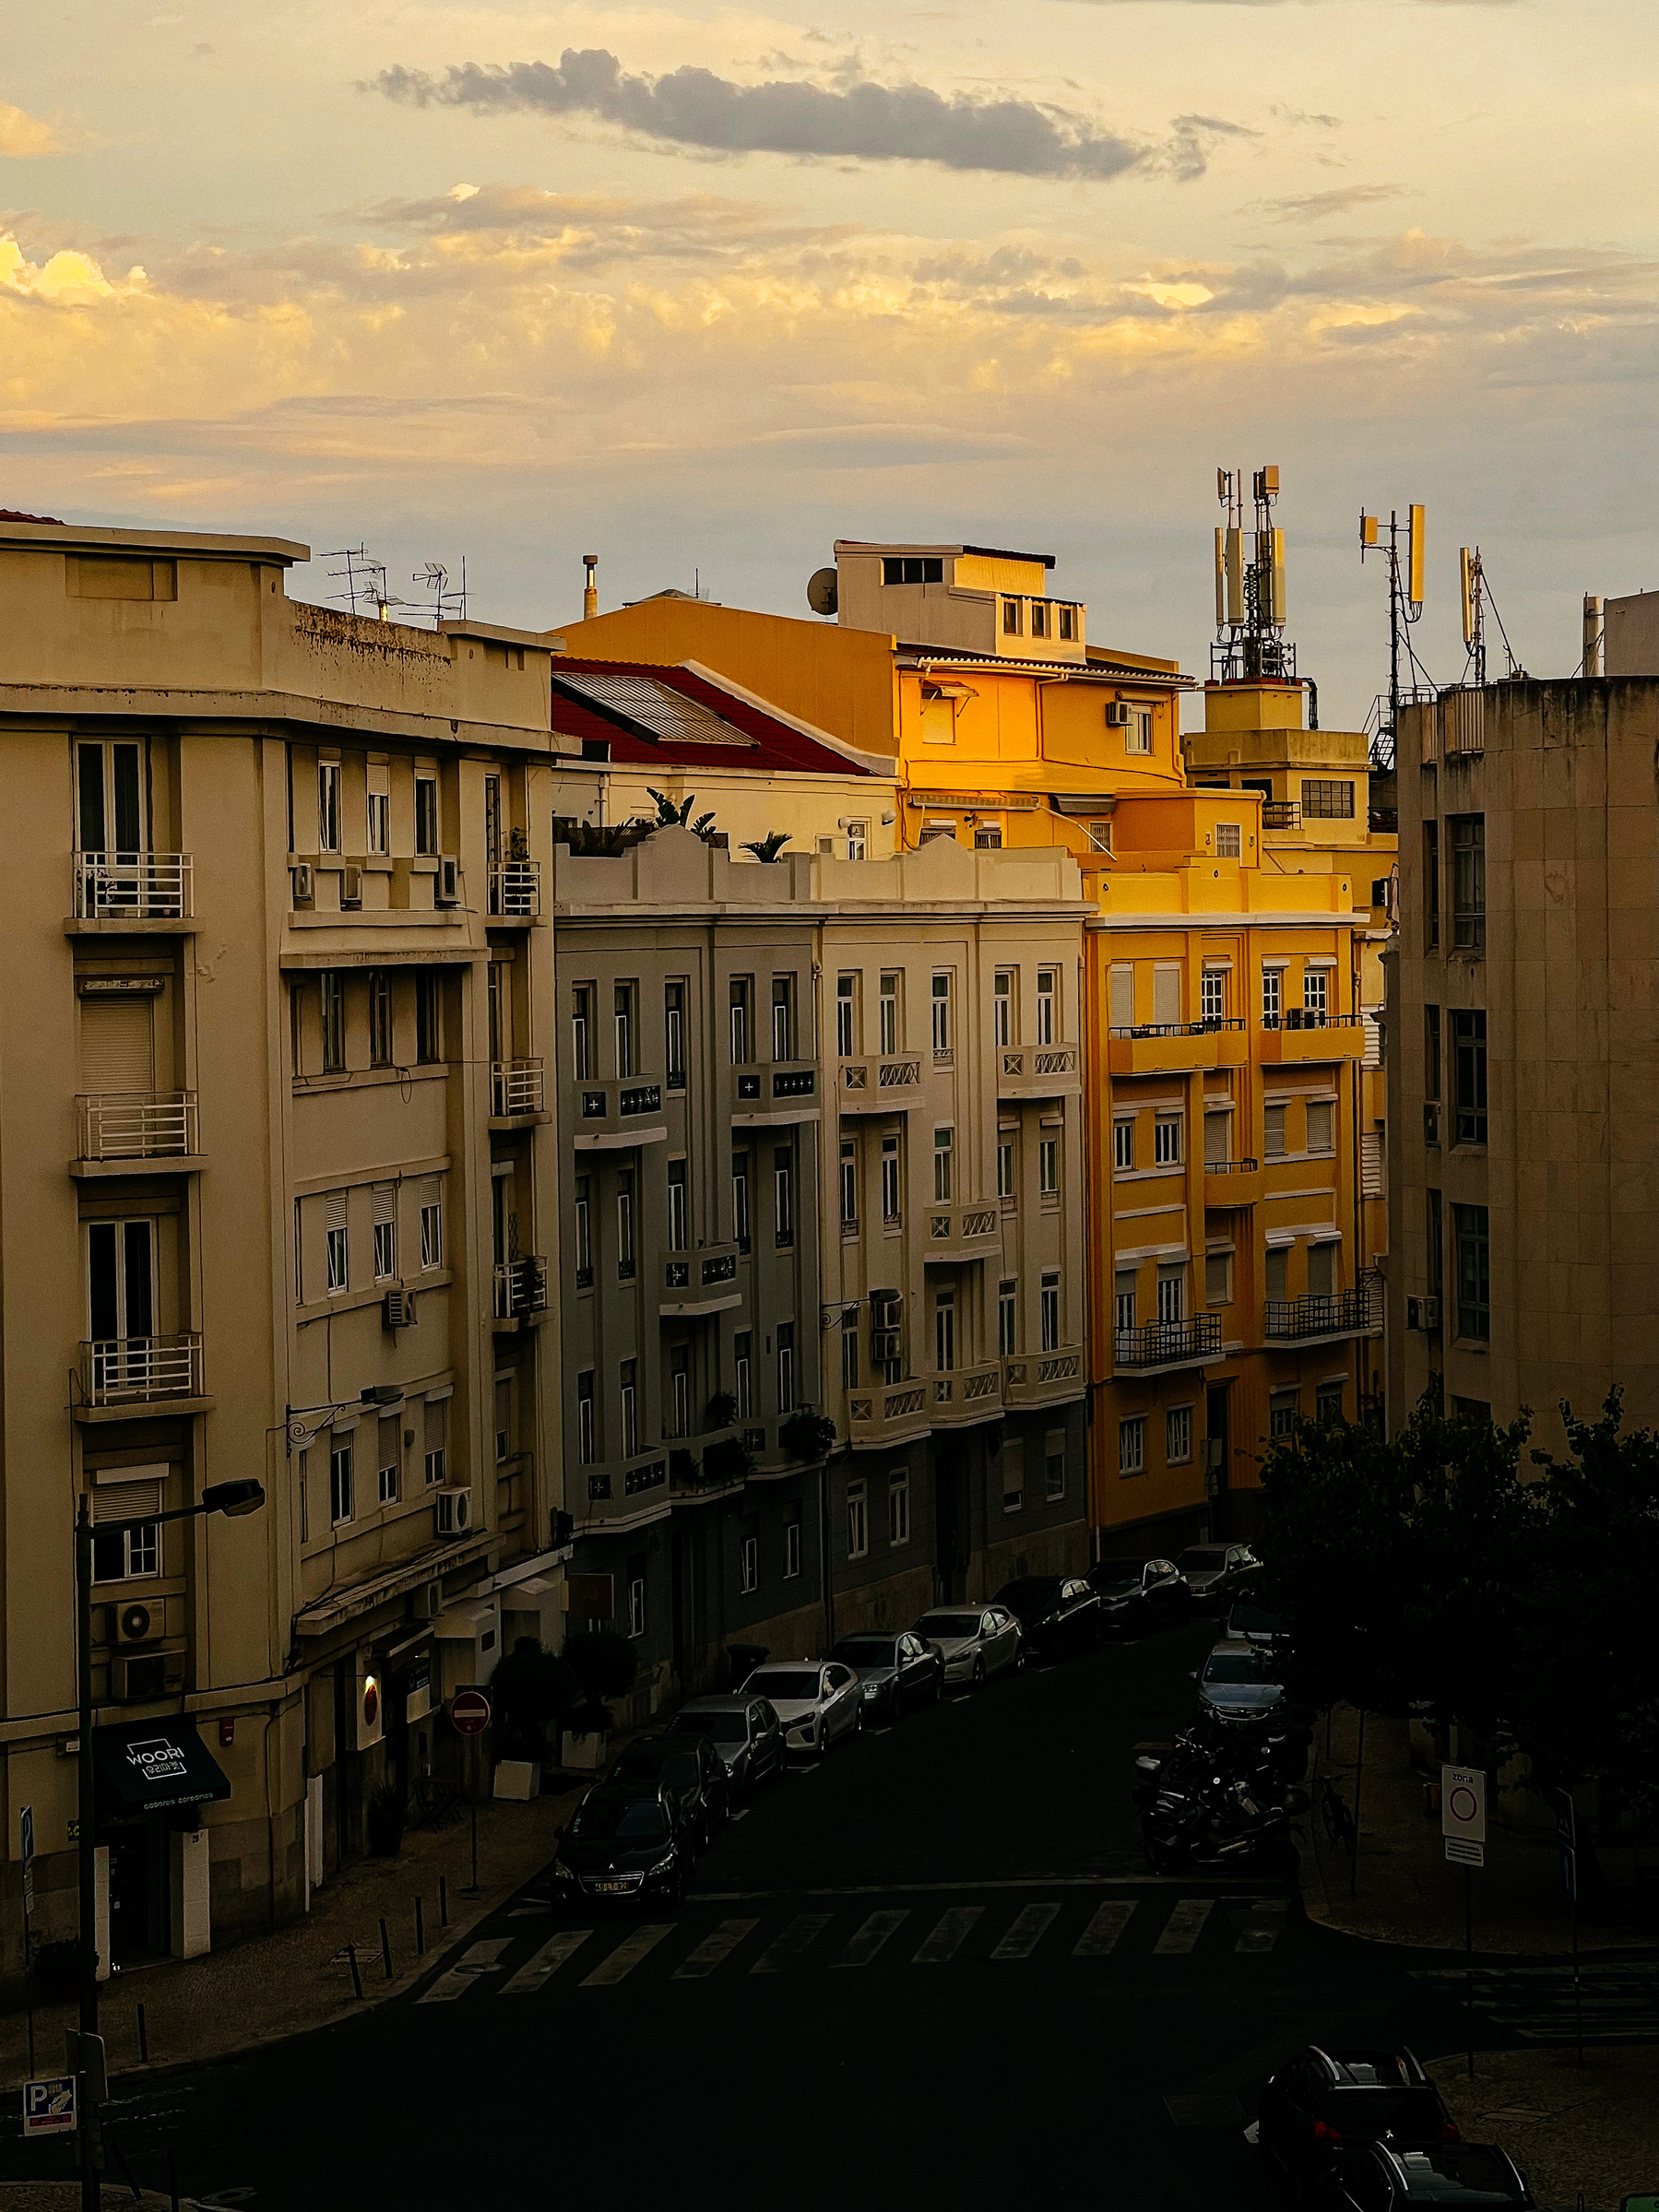 A street view with buildings painted in different shades of yellow. Sky also yellow. 